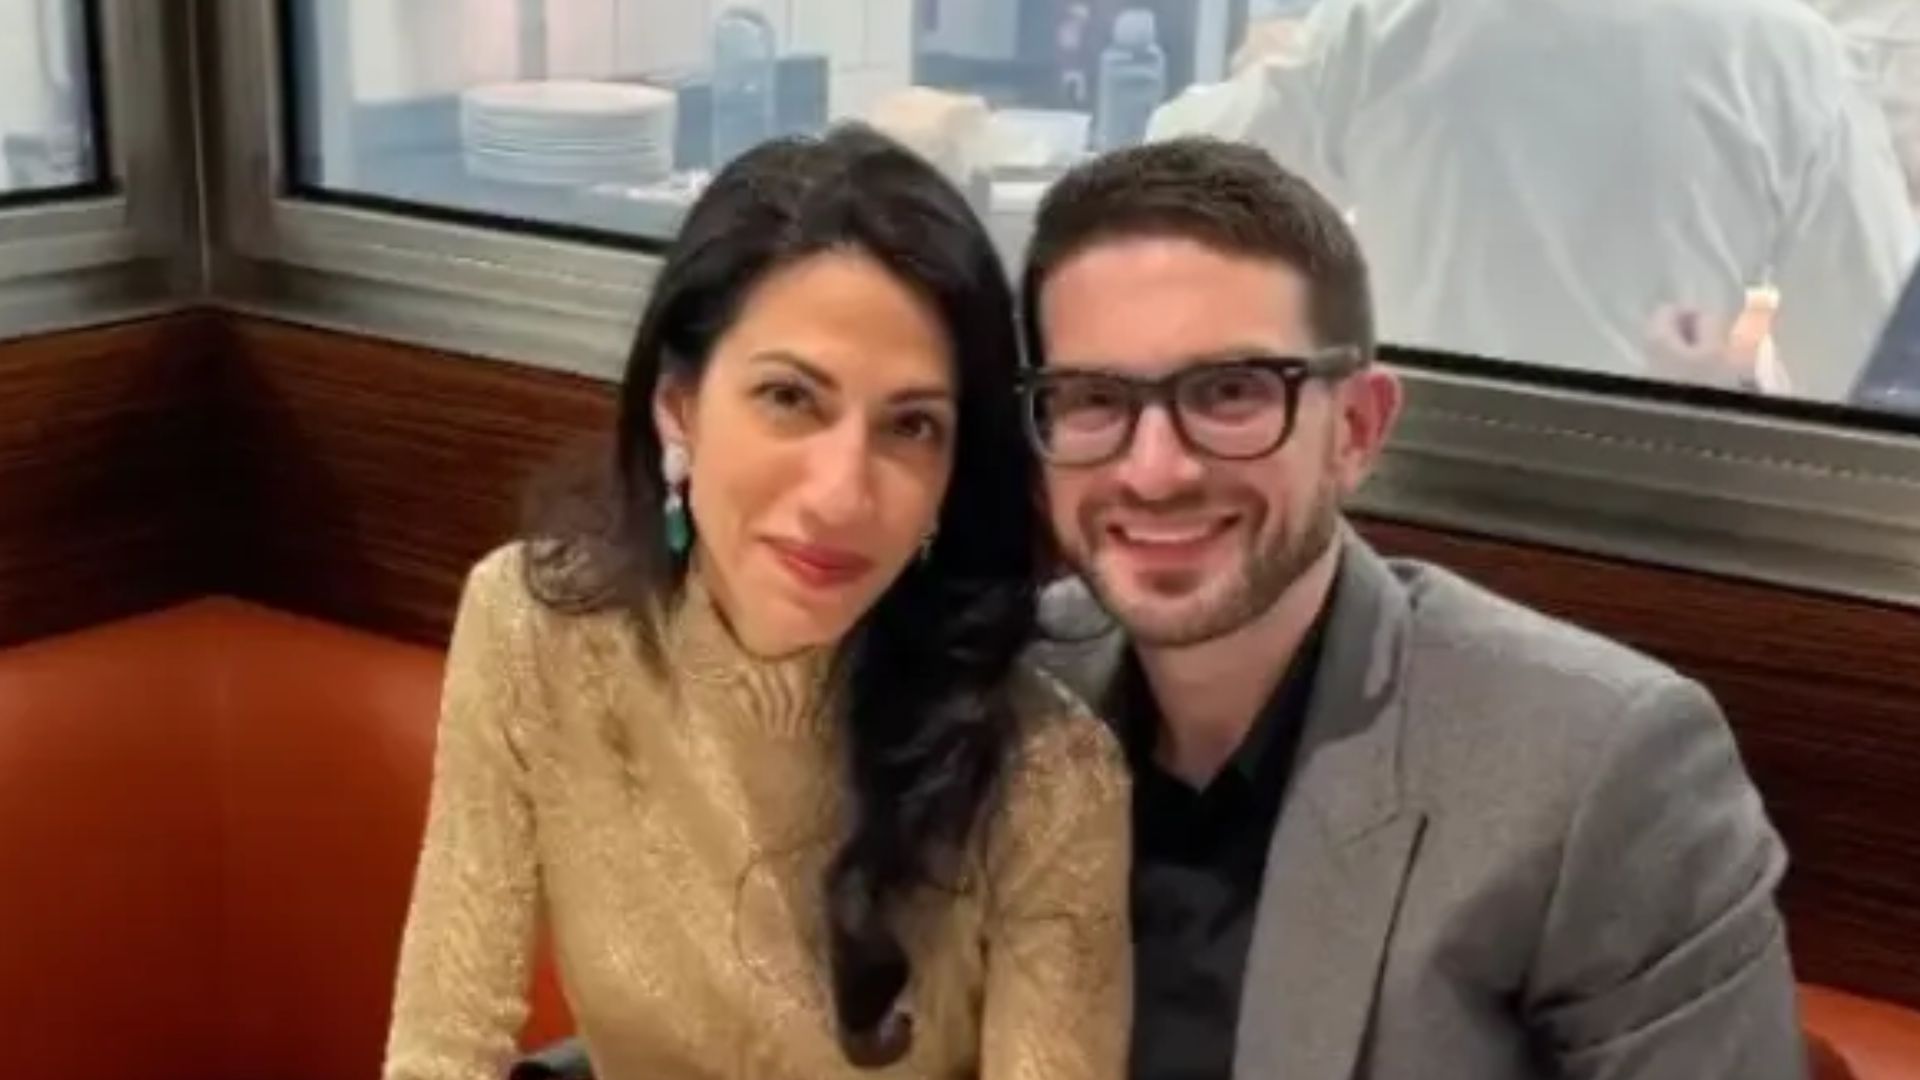 Huma Abedin and Alexander Soros spark dating rumors with Valentine’s Day post